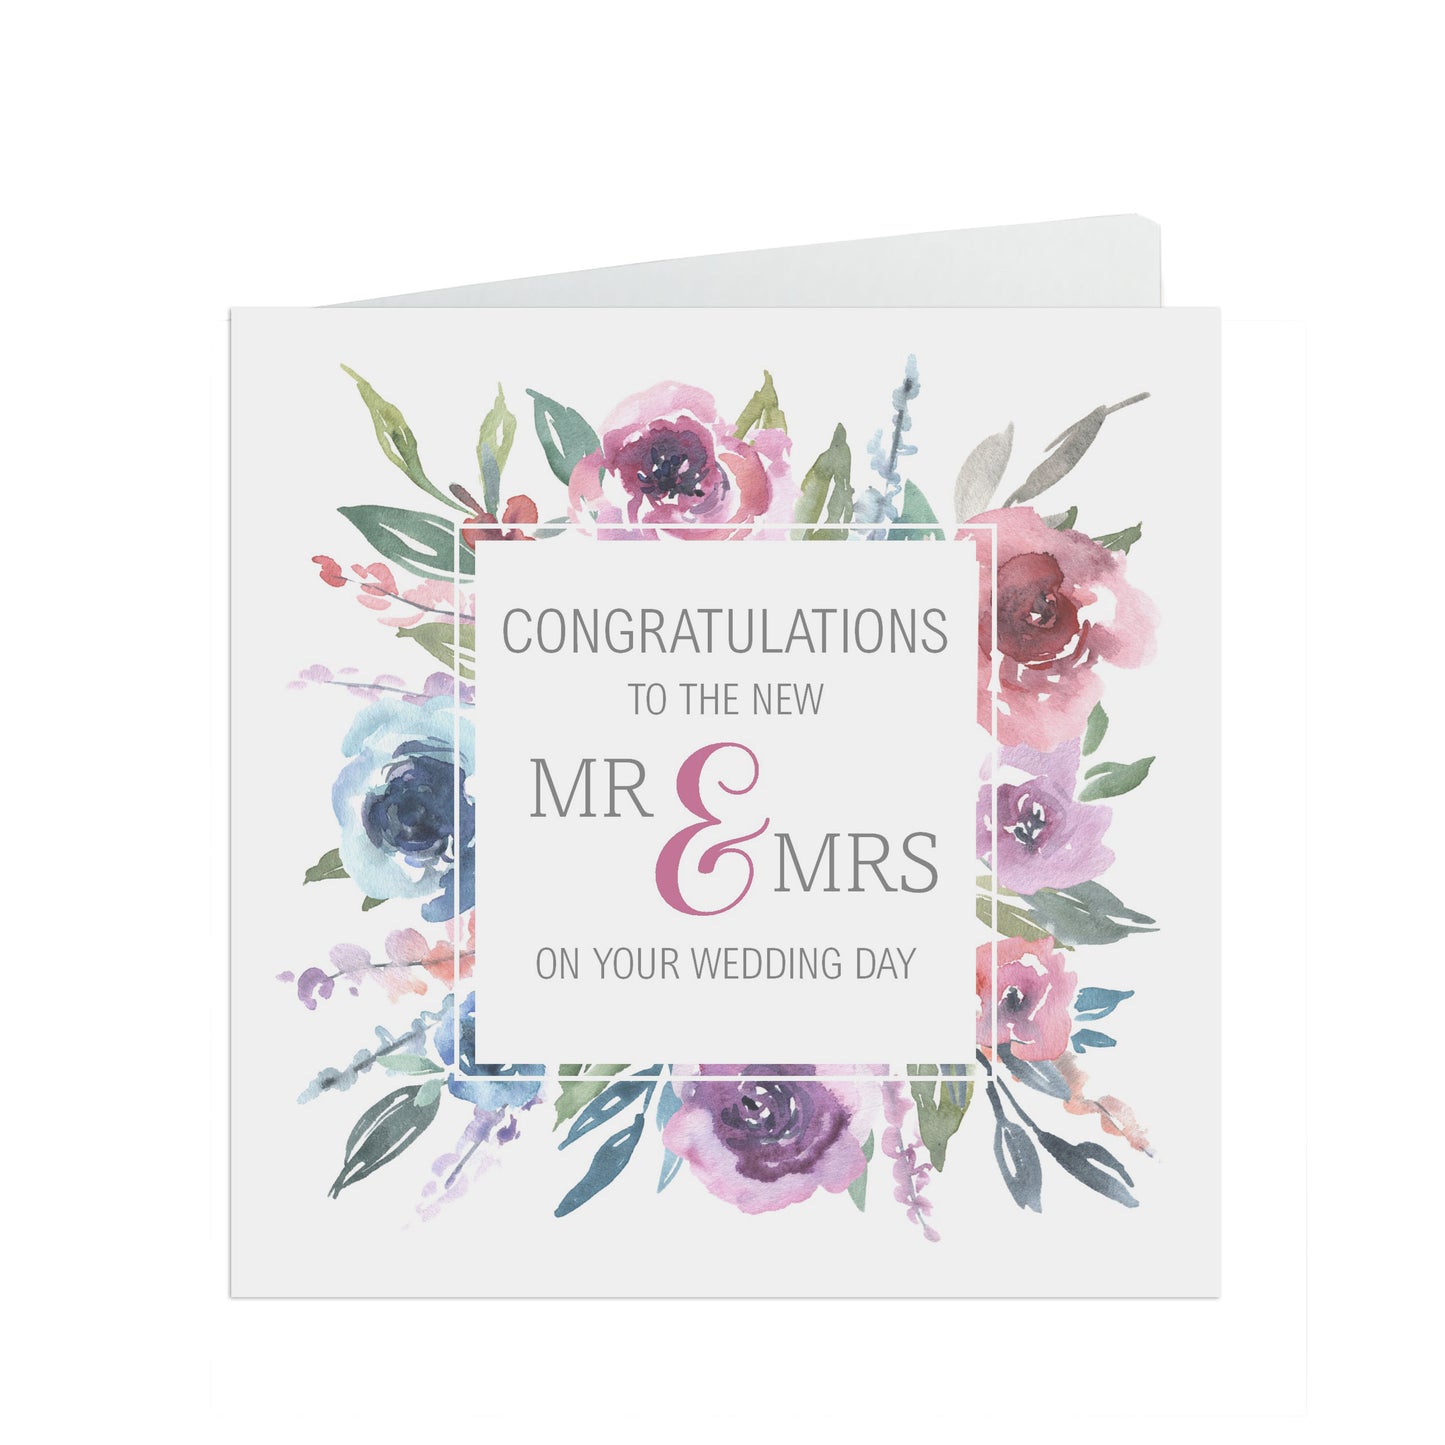 Congratulations To The New Mr & Mrs Wedding Day Card - Blue & Purple